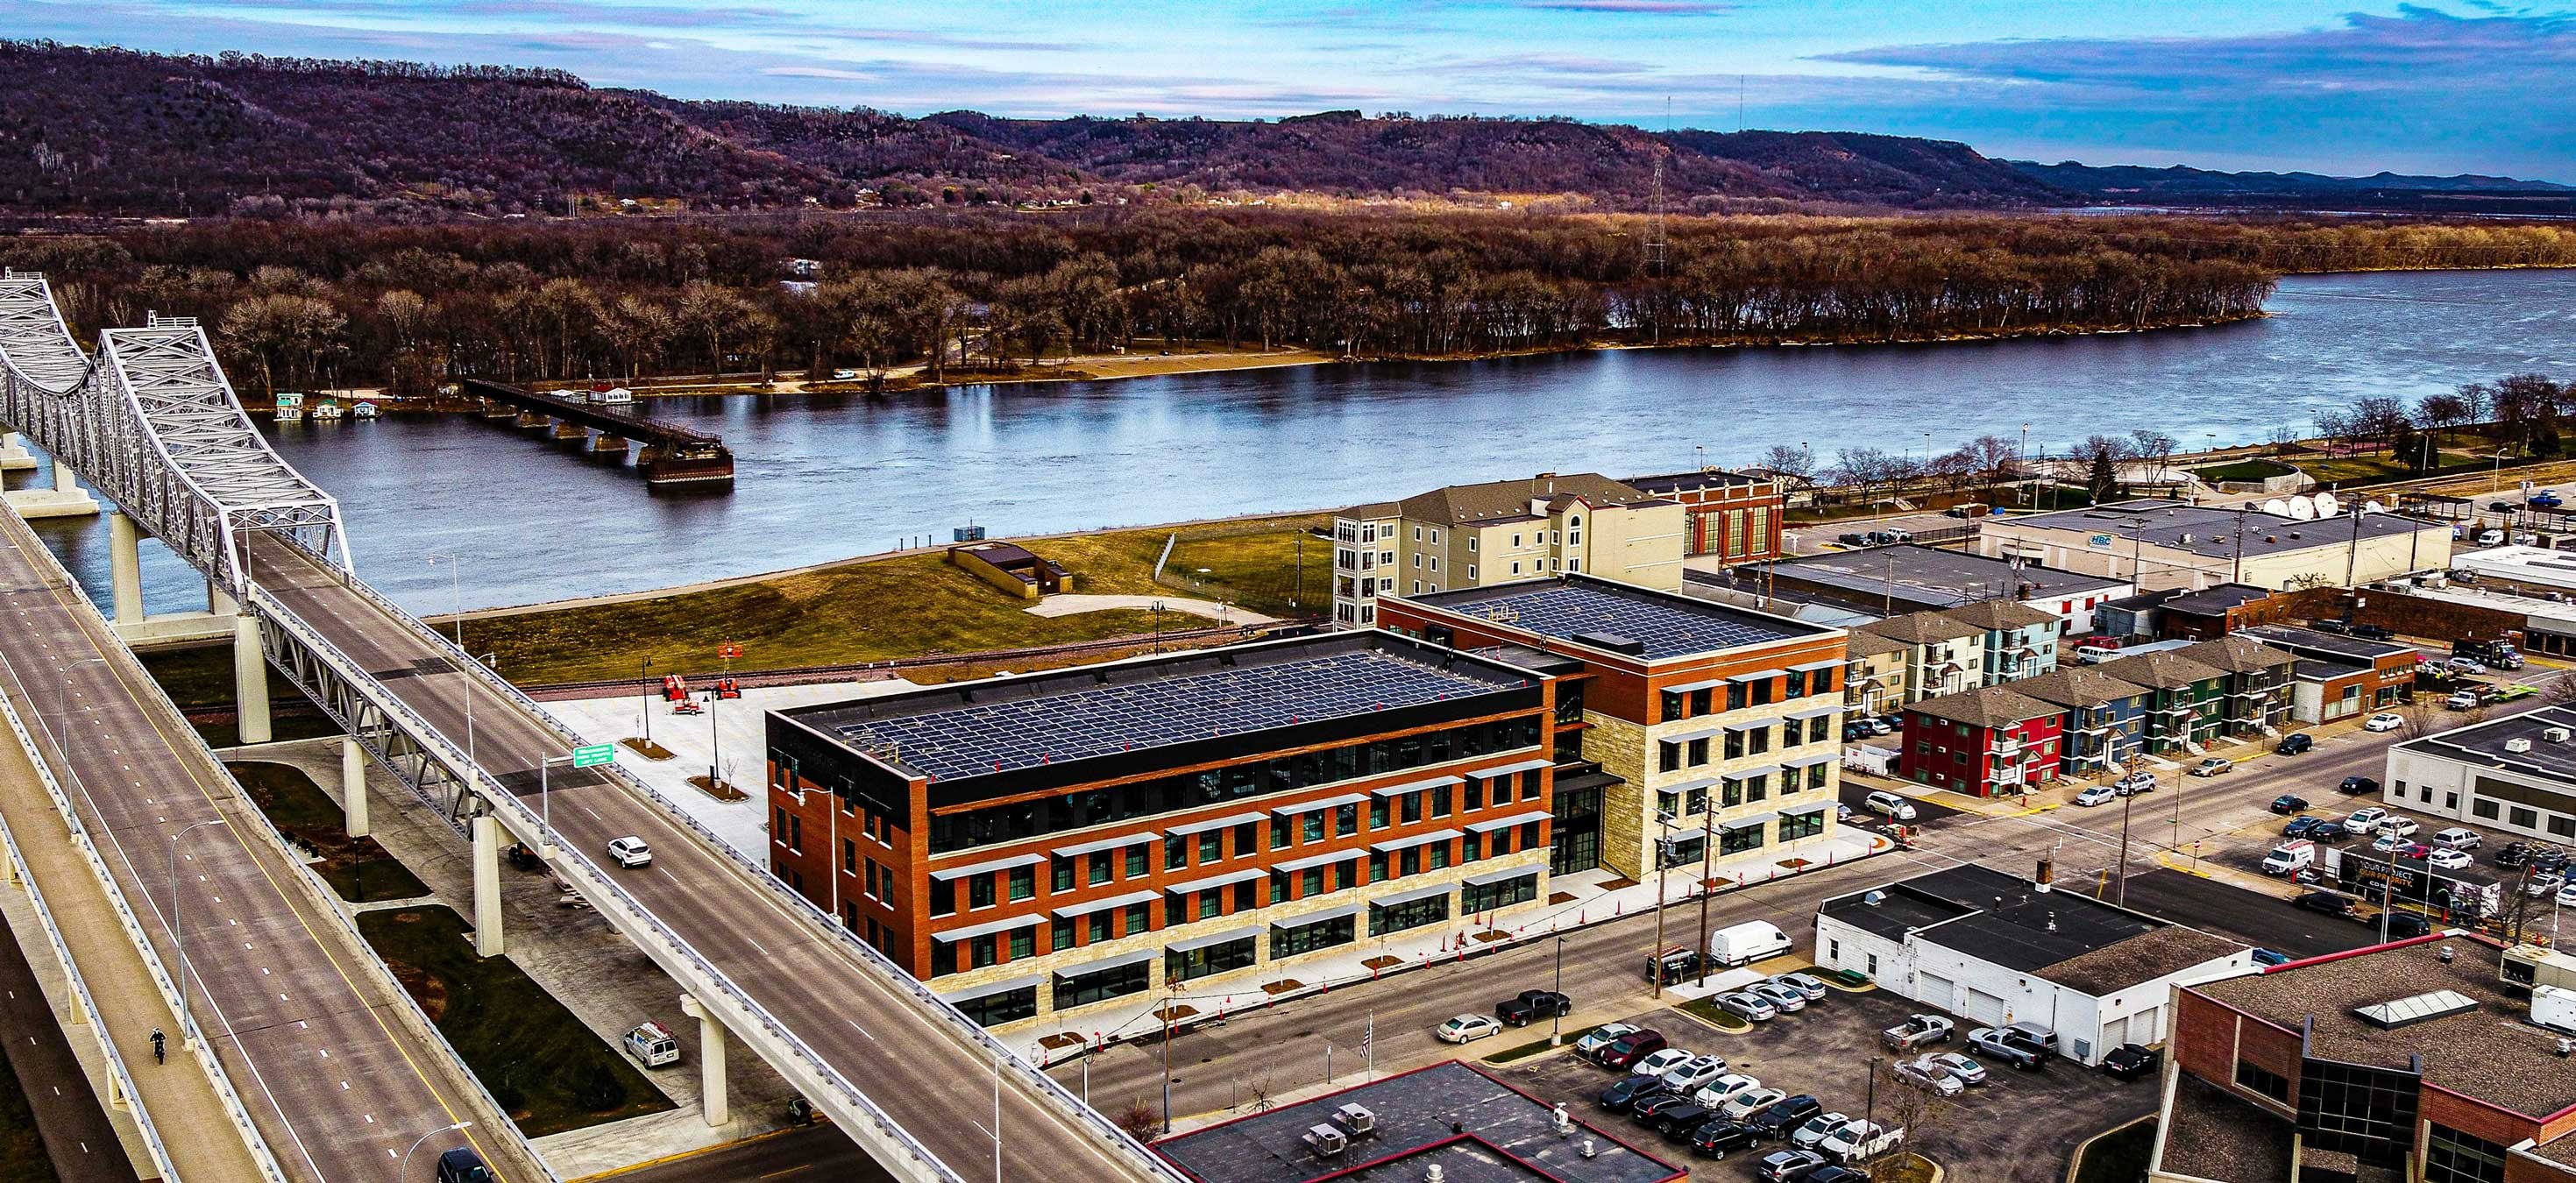 C.D. Smith Construction Manager for Fastenal Corporate Office Mass Timber Building Exterior with River in Background